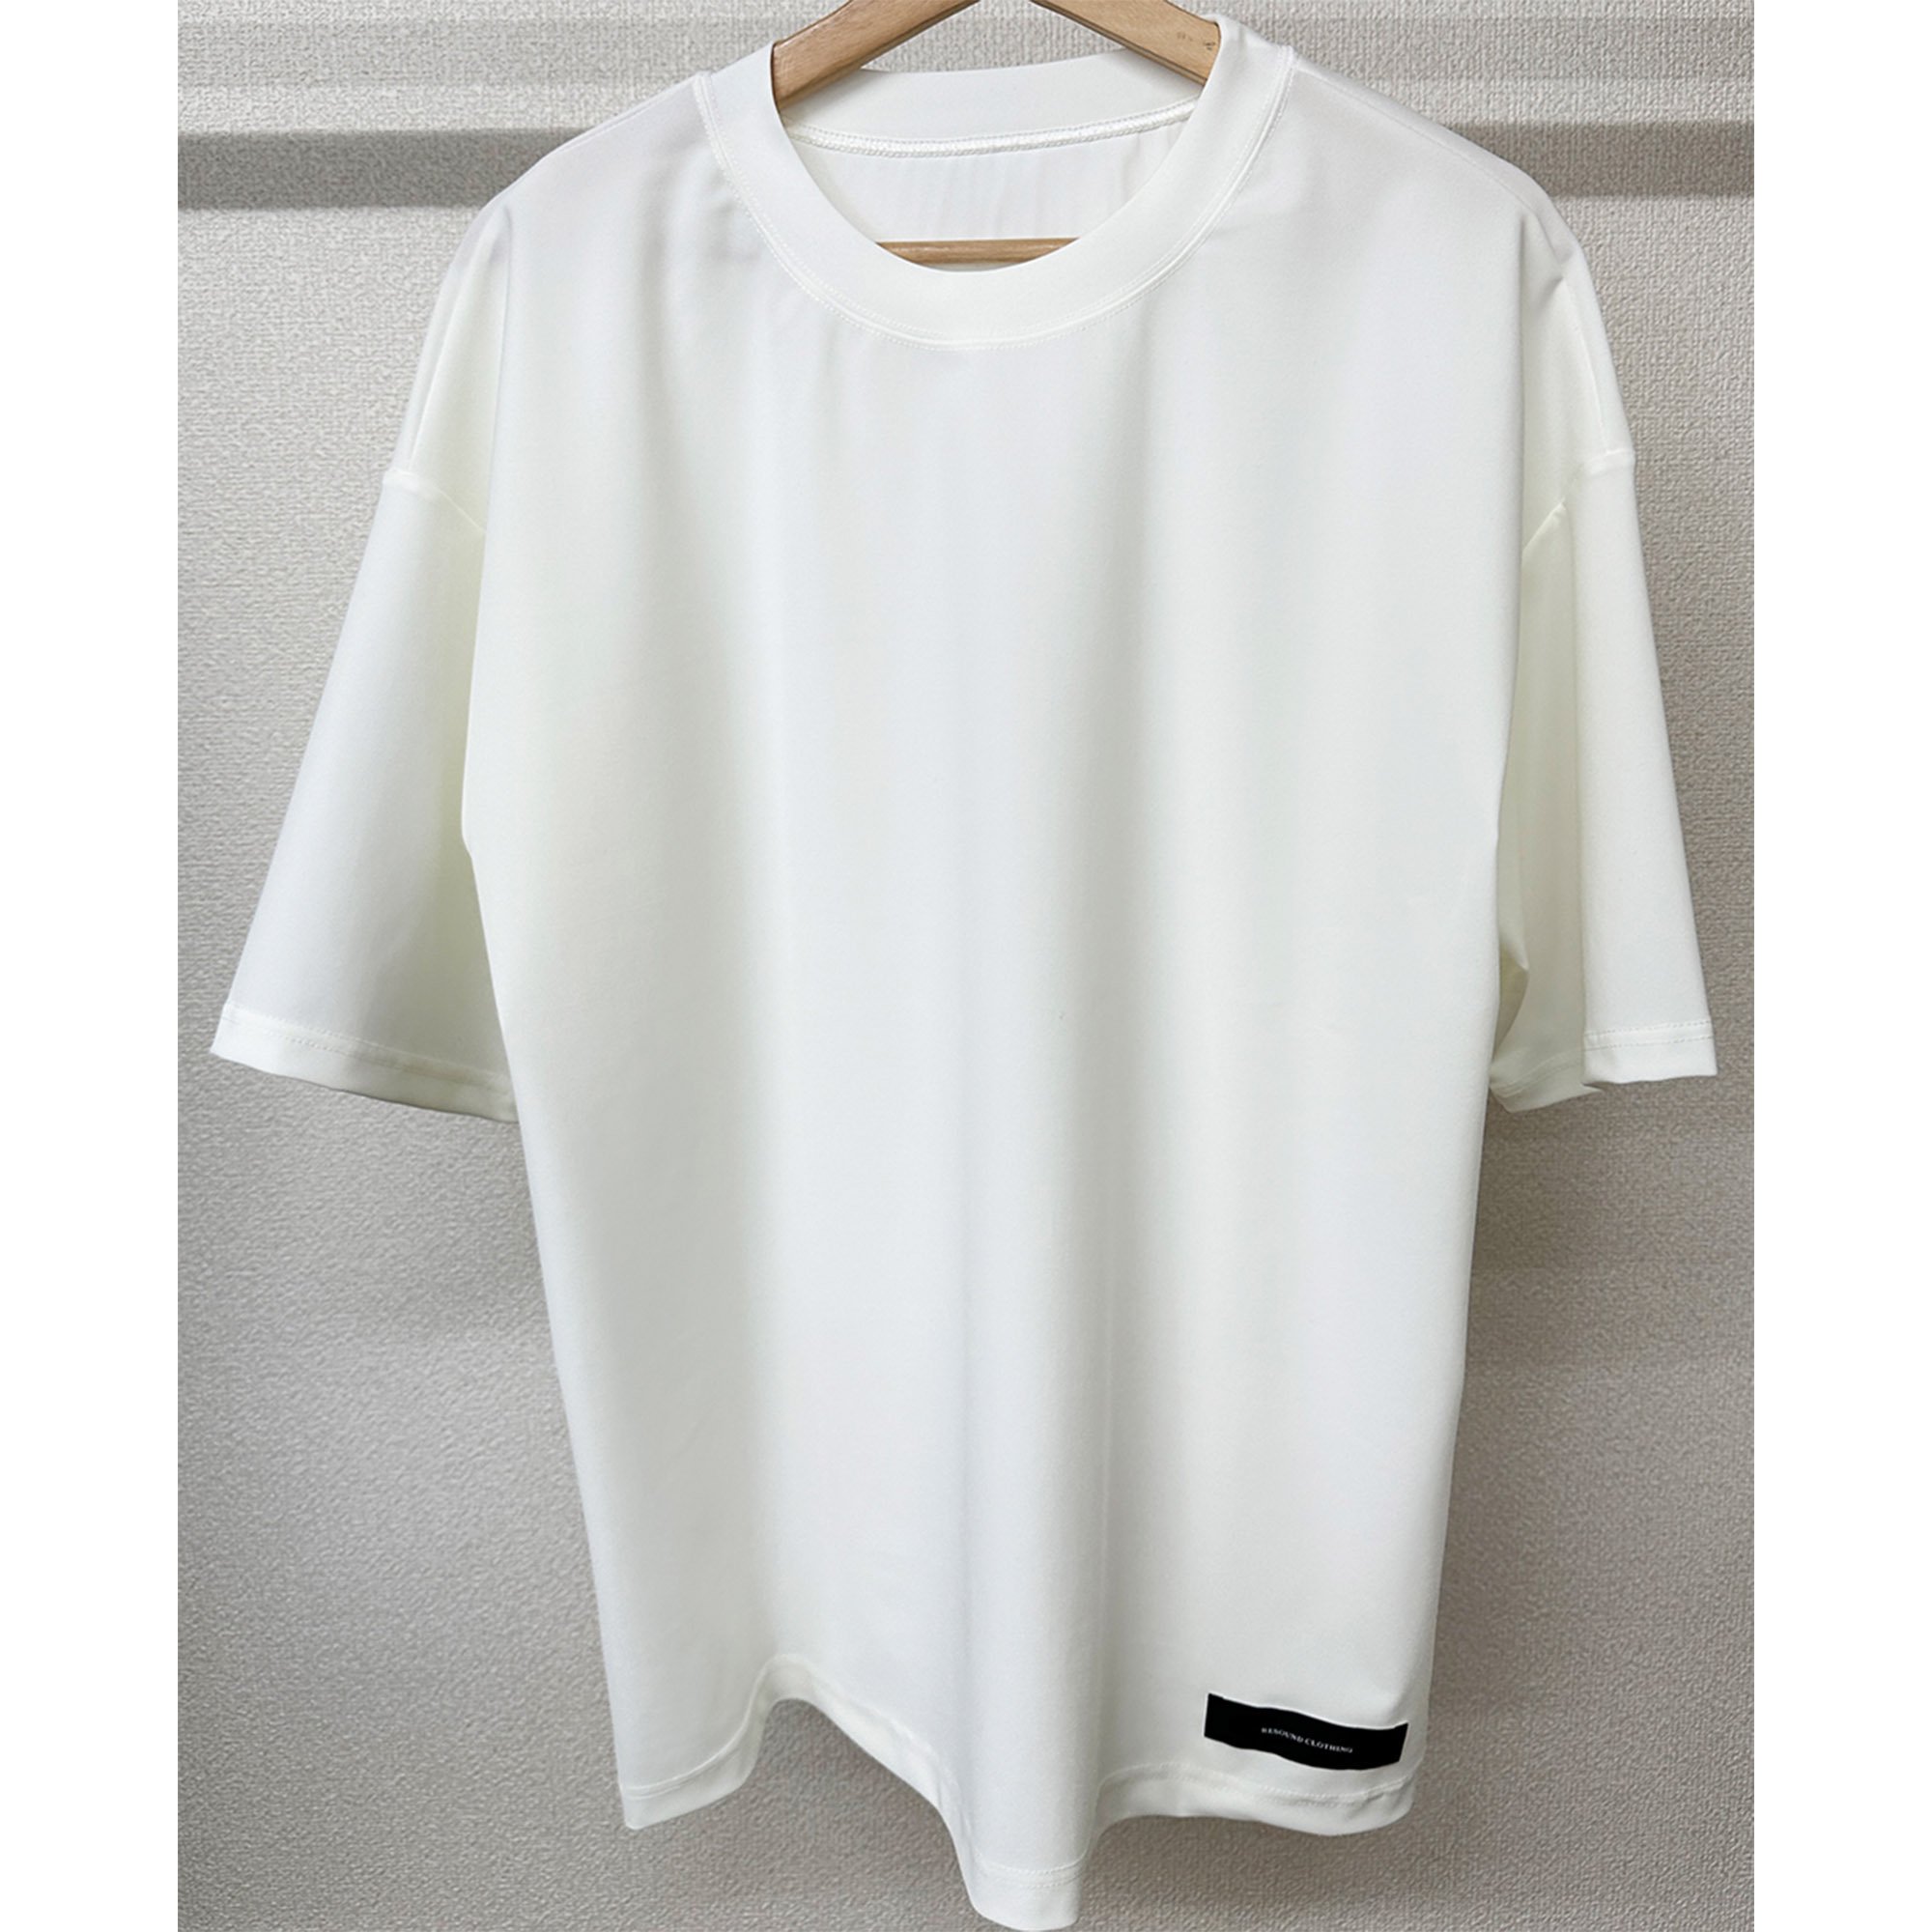 <img class='new_mark_img1' src='https://img.shop-pro.jp/img/new/icons1.gif' style='border:none;display:inline;margin:0px;padding:0px;width:auto;' />OX JERSEY OVER TEE WHITE